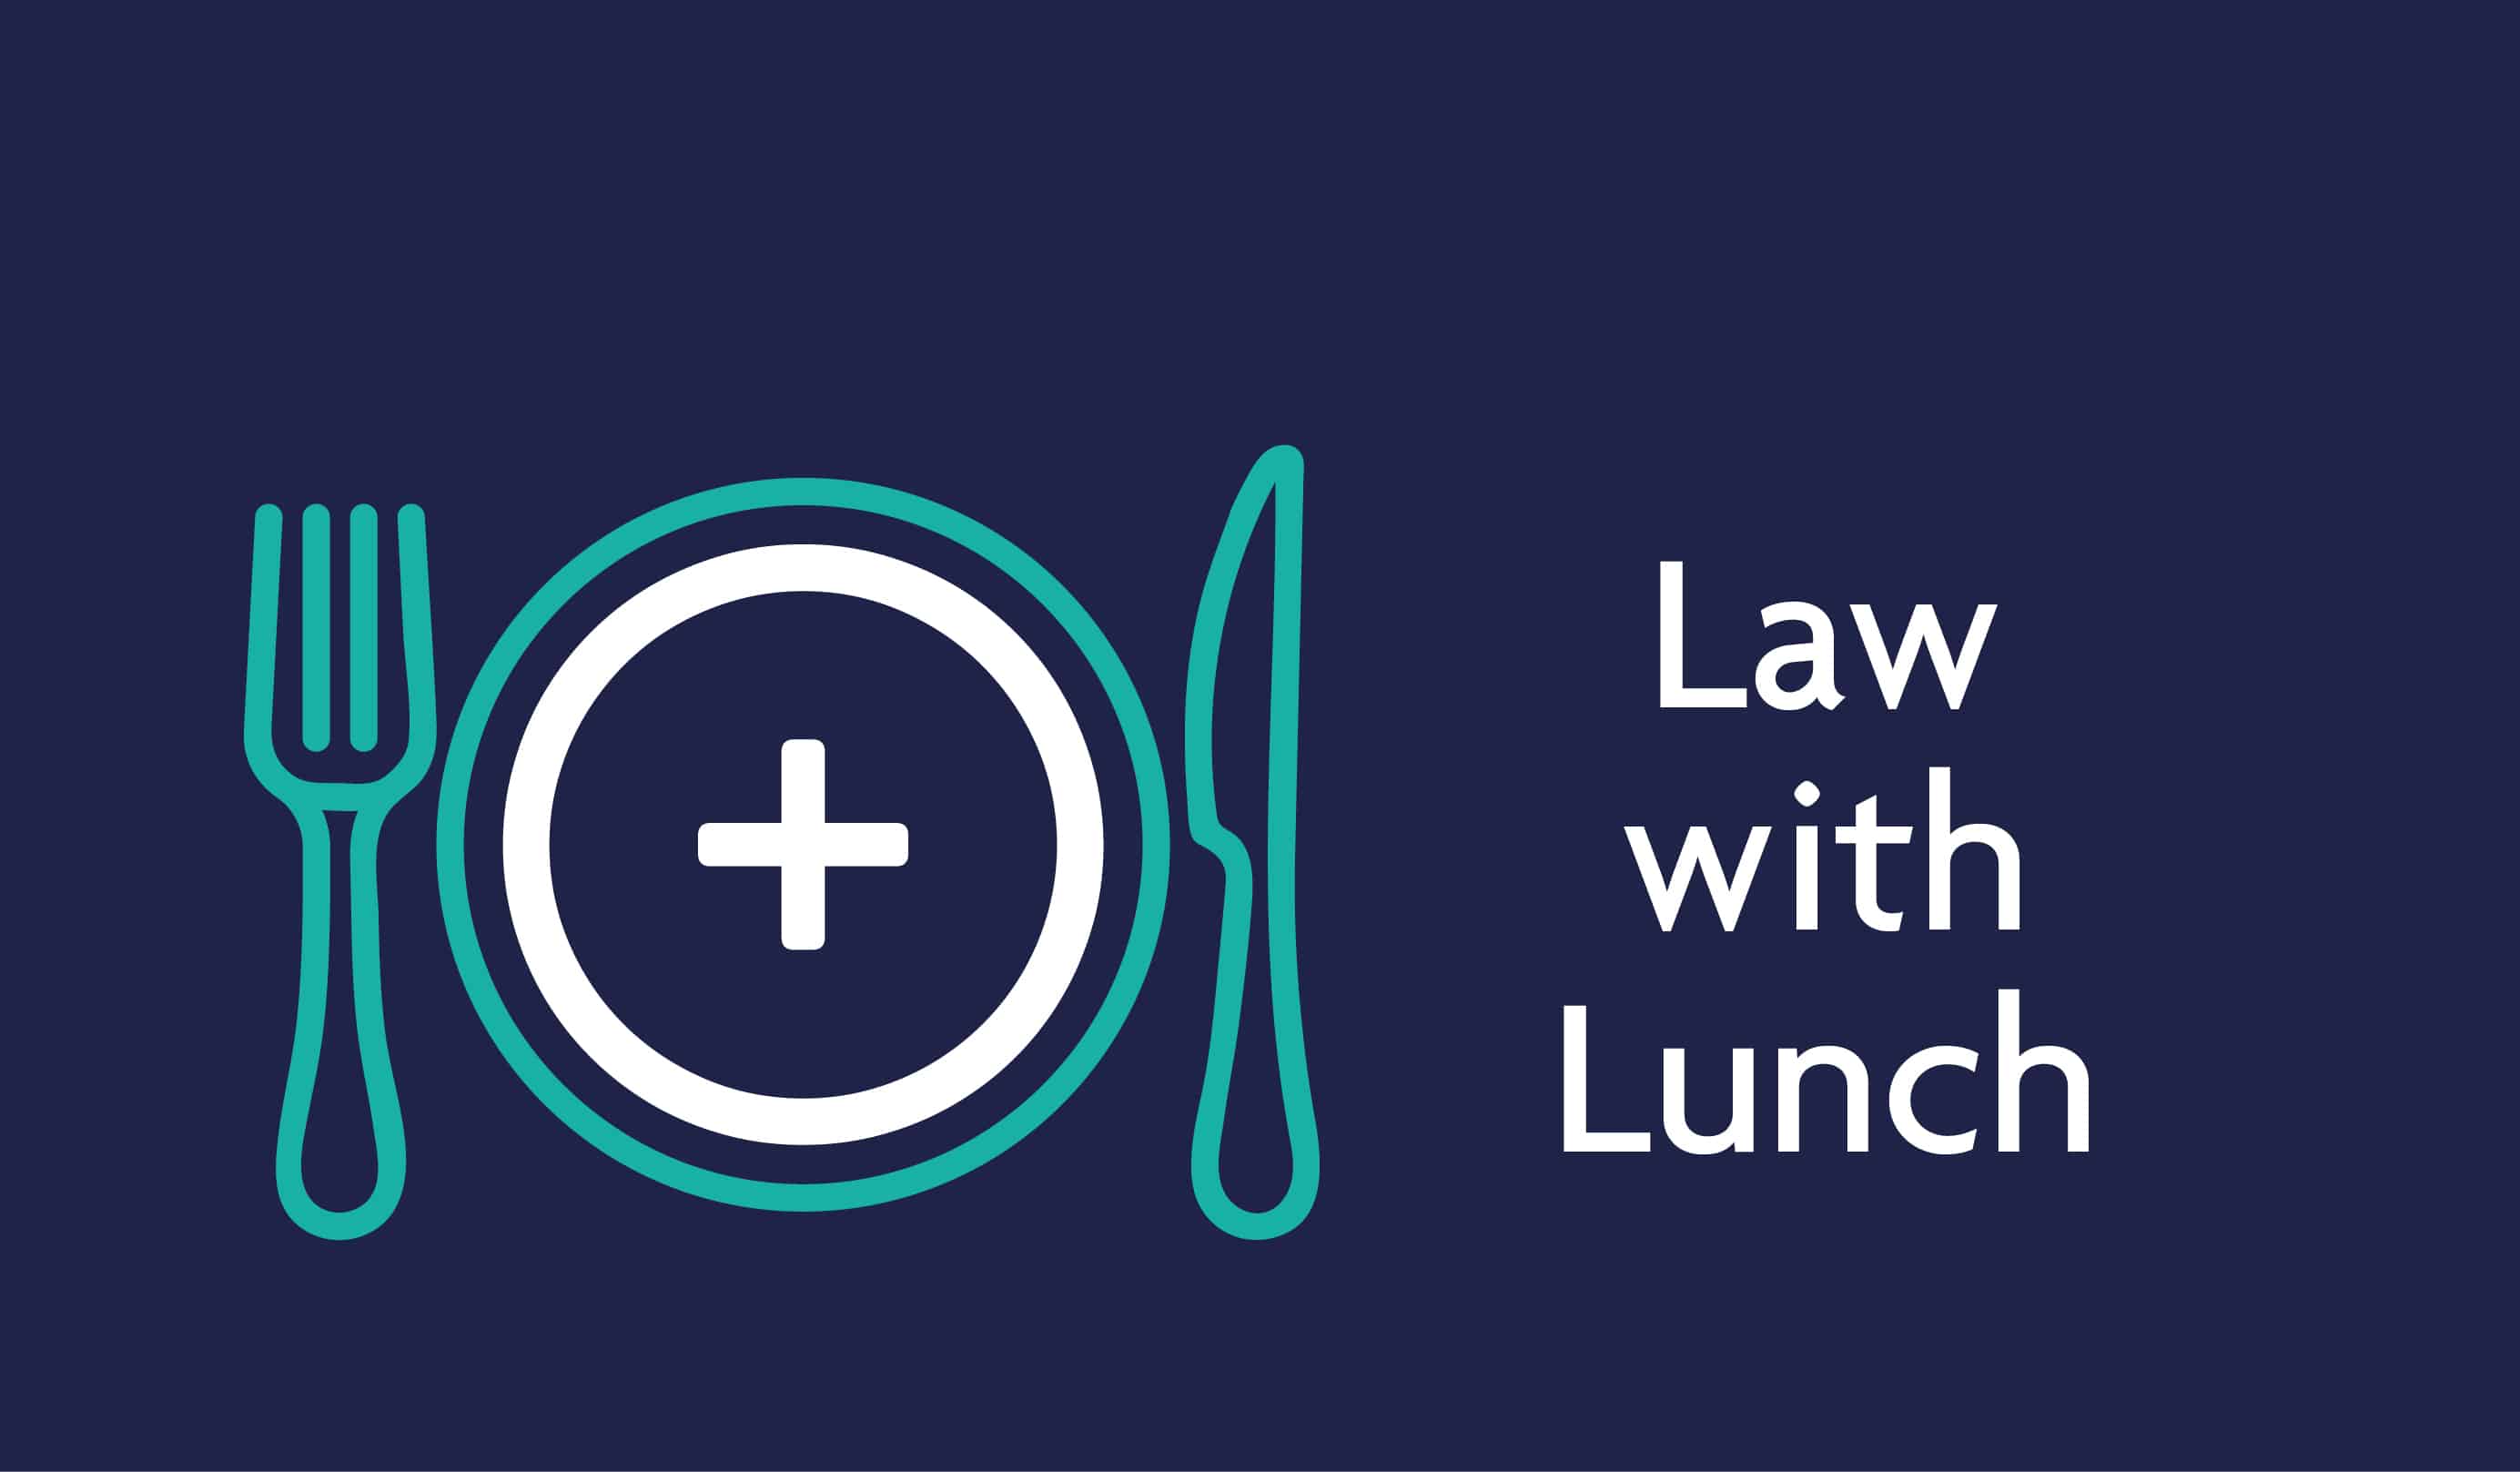 Clinical Negligence & Personal Injury | ‘Law with Lunch’ Webinar Series | 14 July 2022